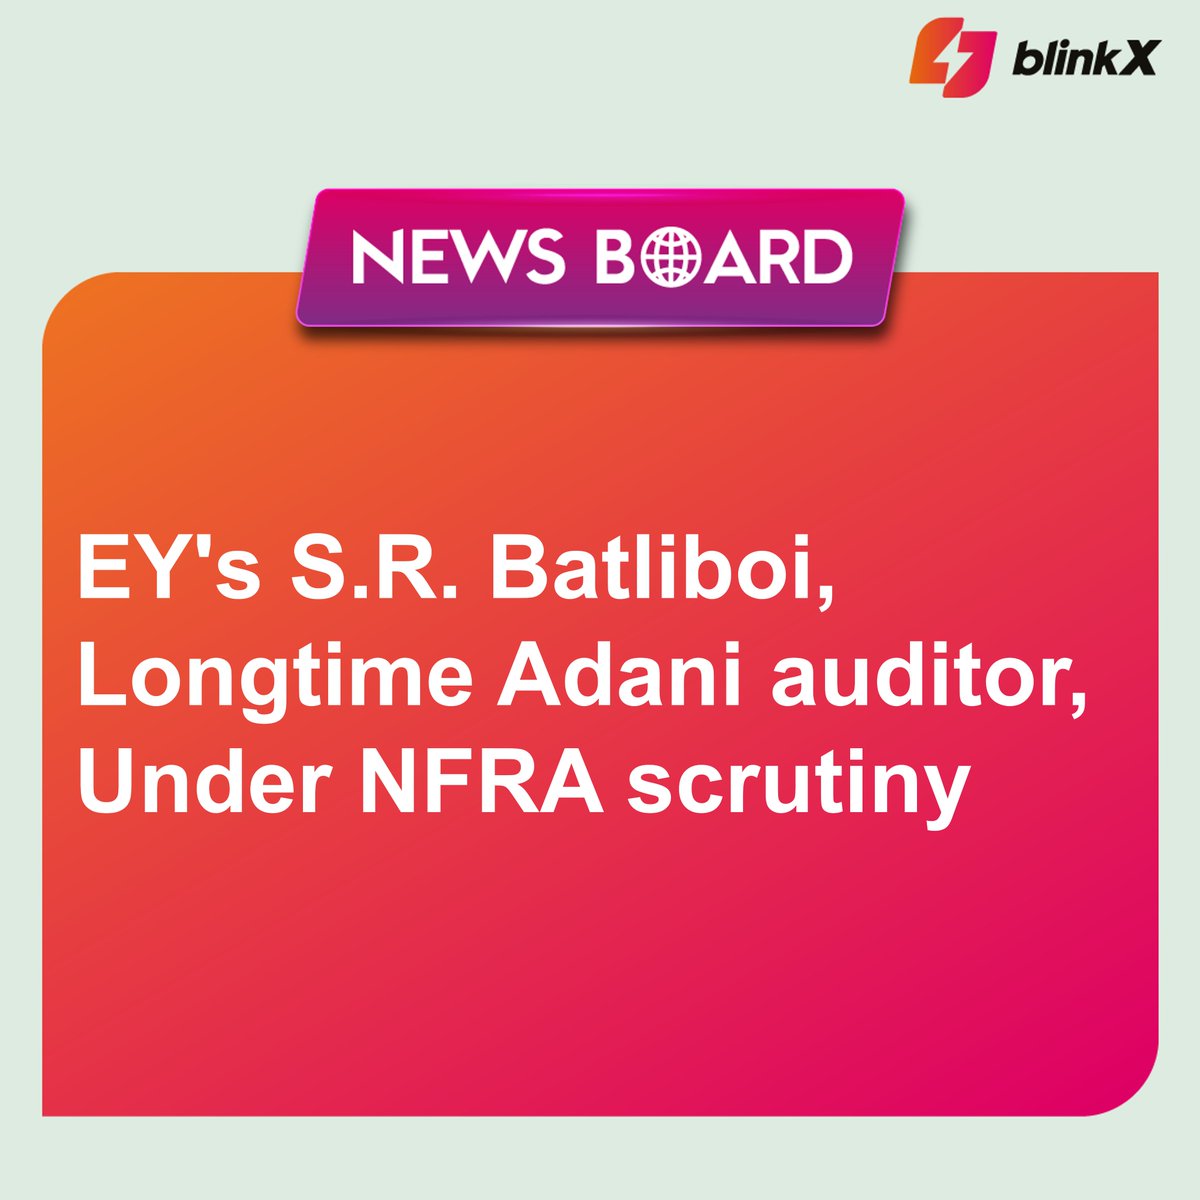 The NFRA has recently initiated an inquiry, seeking files and communications pertaining to audits...

Read more at: blinkx.in/news/company/e…

#NFRA #AdaniGroup #audit #batliboi #markets #stockmarket #investor #investments #finance #research #MadeForTheMarket #blinkX #getblinkX